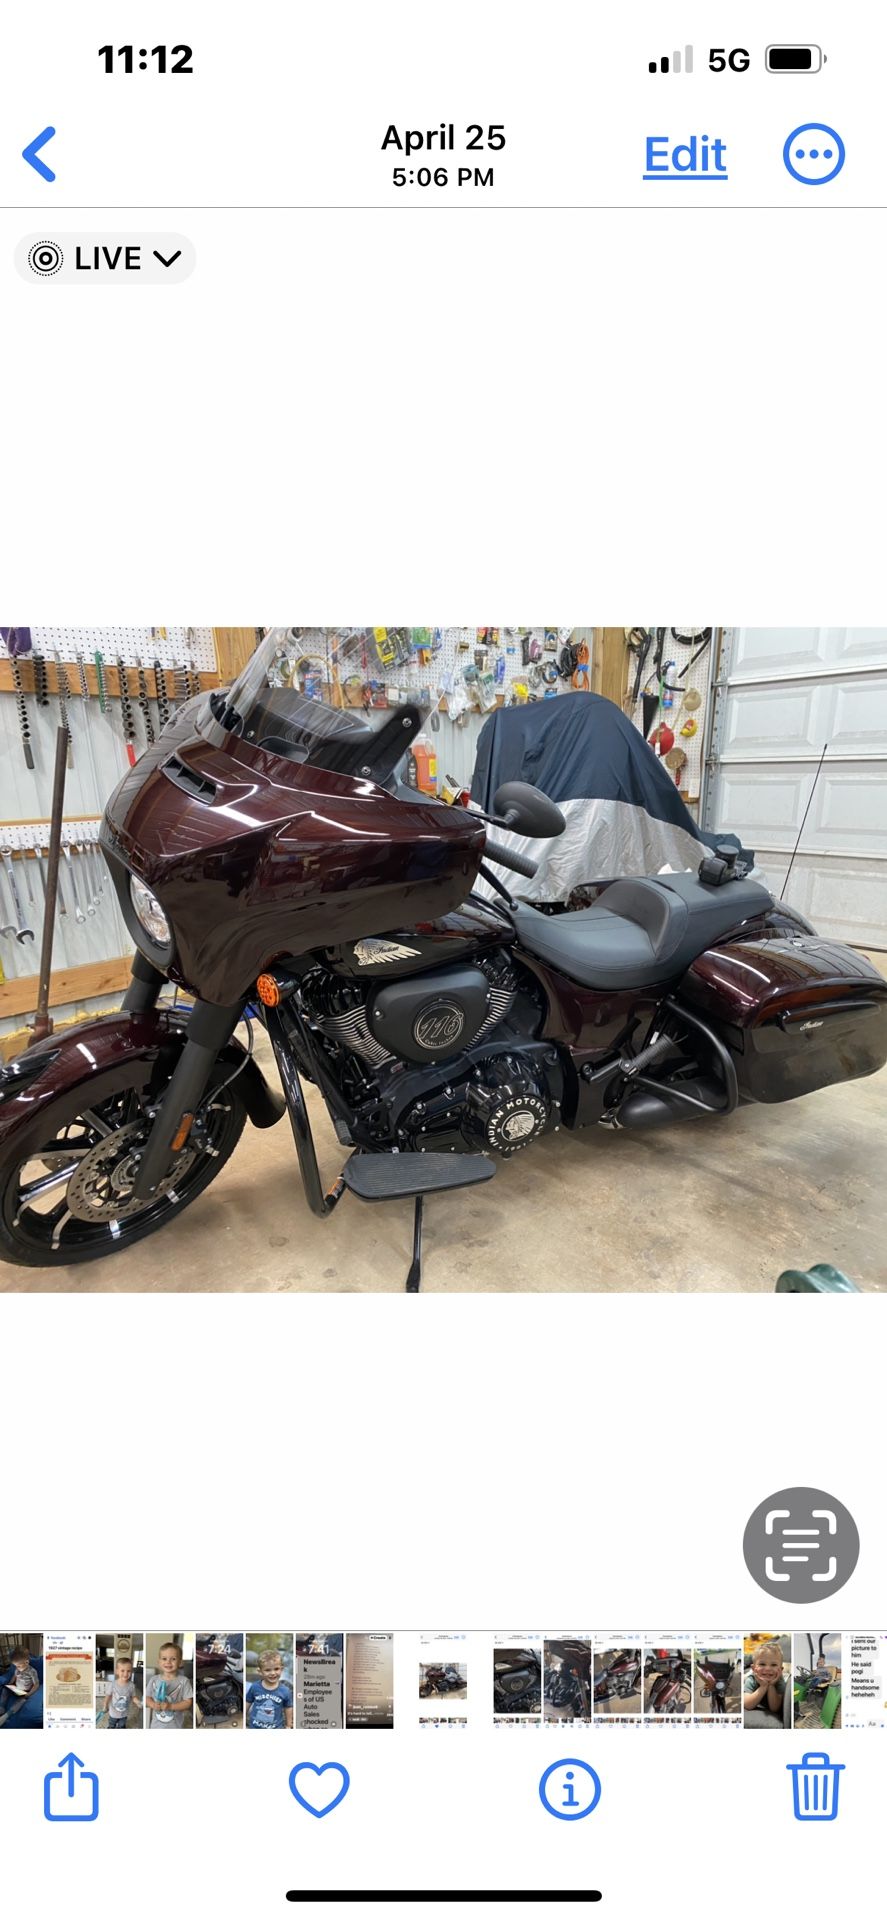 2021 Indian Chieftain Indian Chieftain  Dark horse